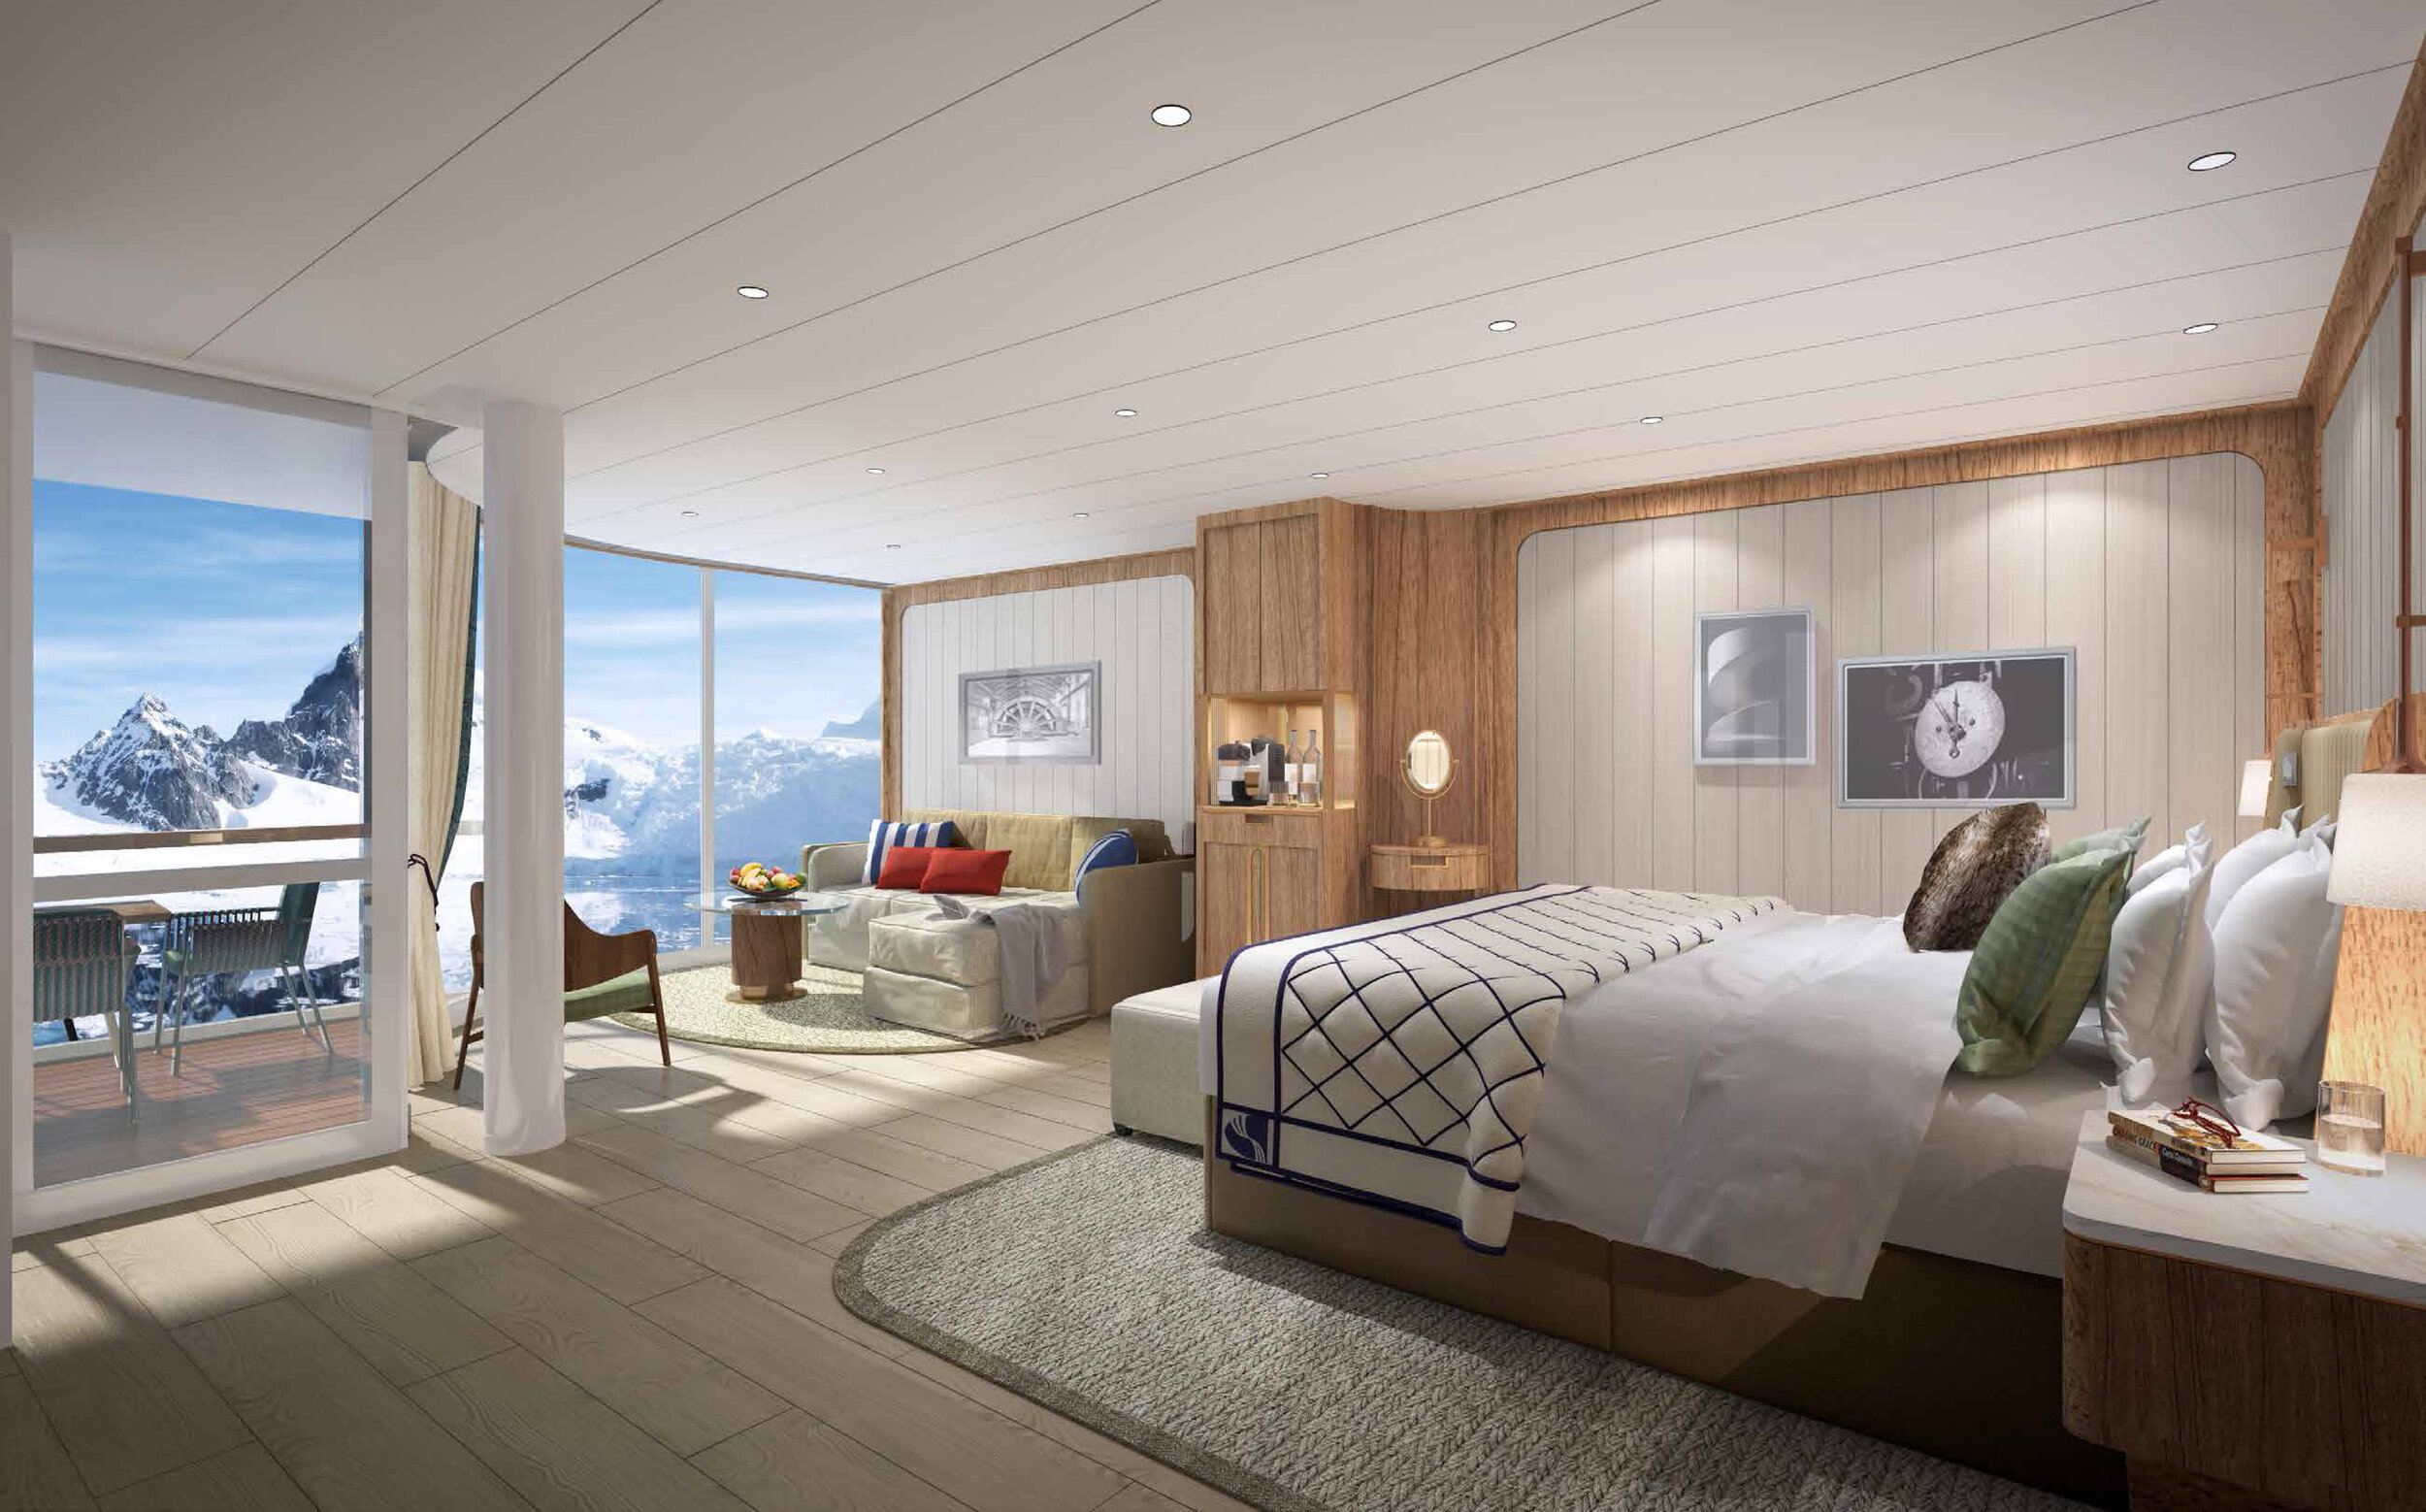 Seabourn expedition ships - Panorama Suite rendering.jpg